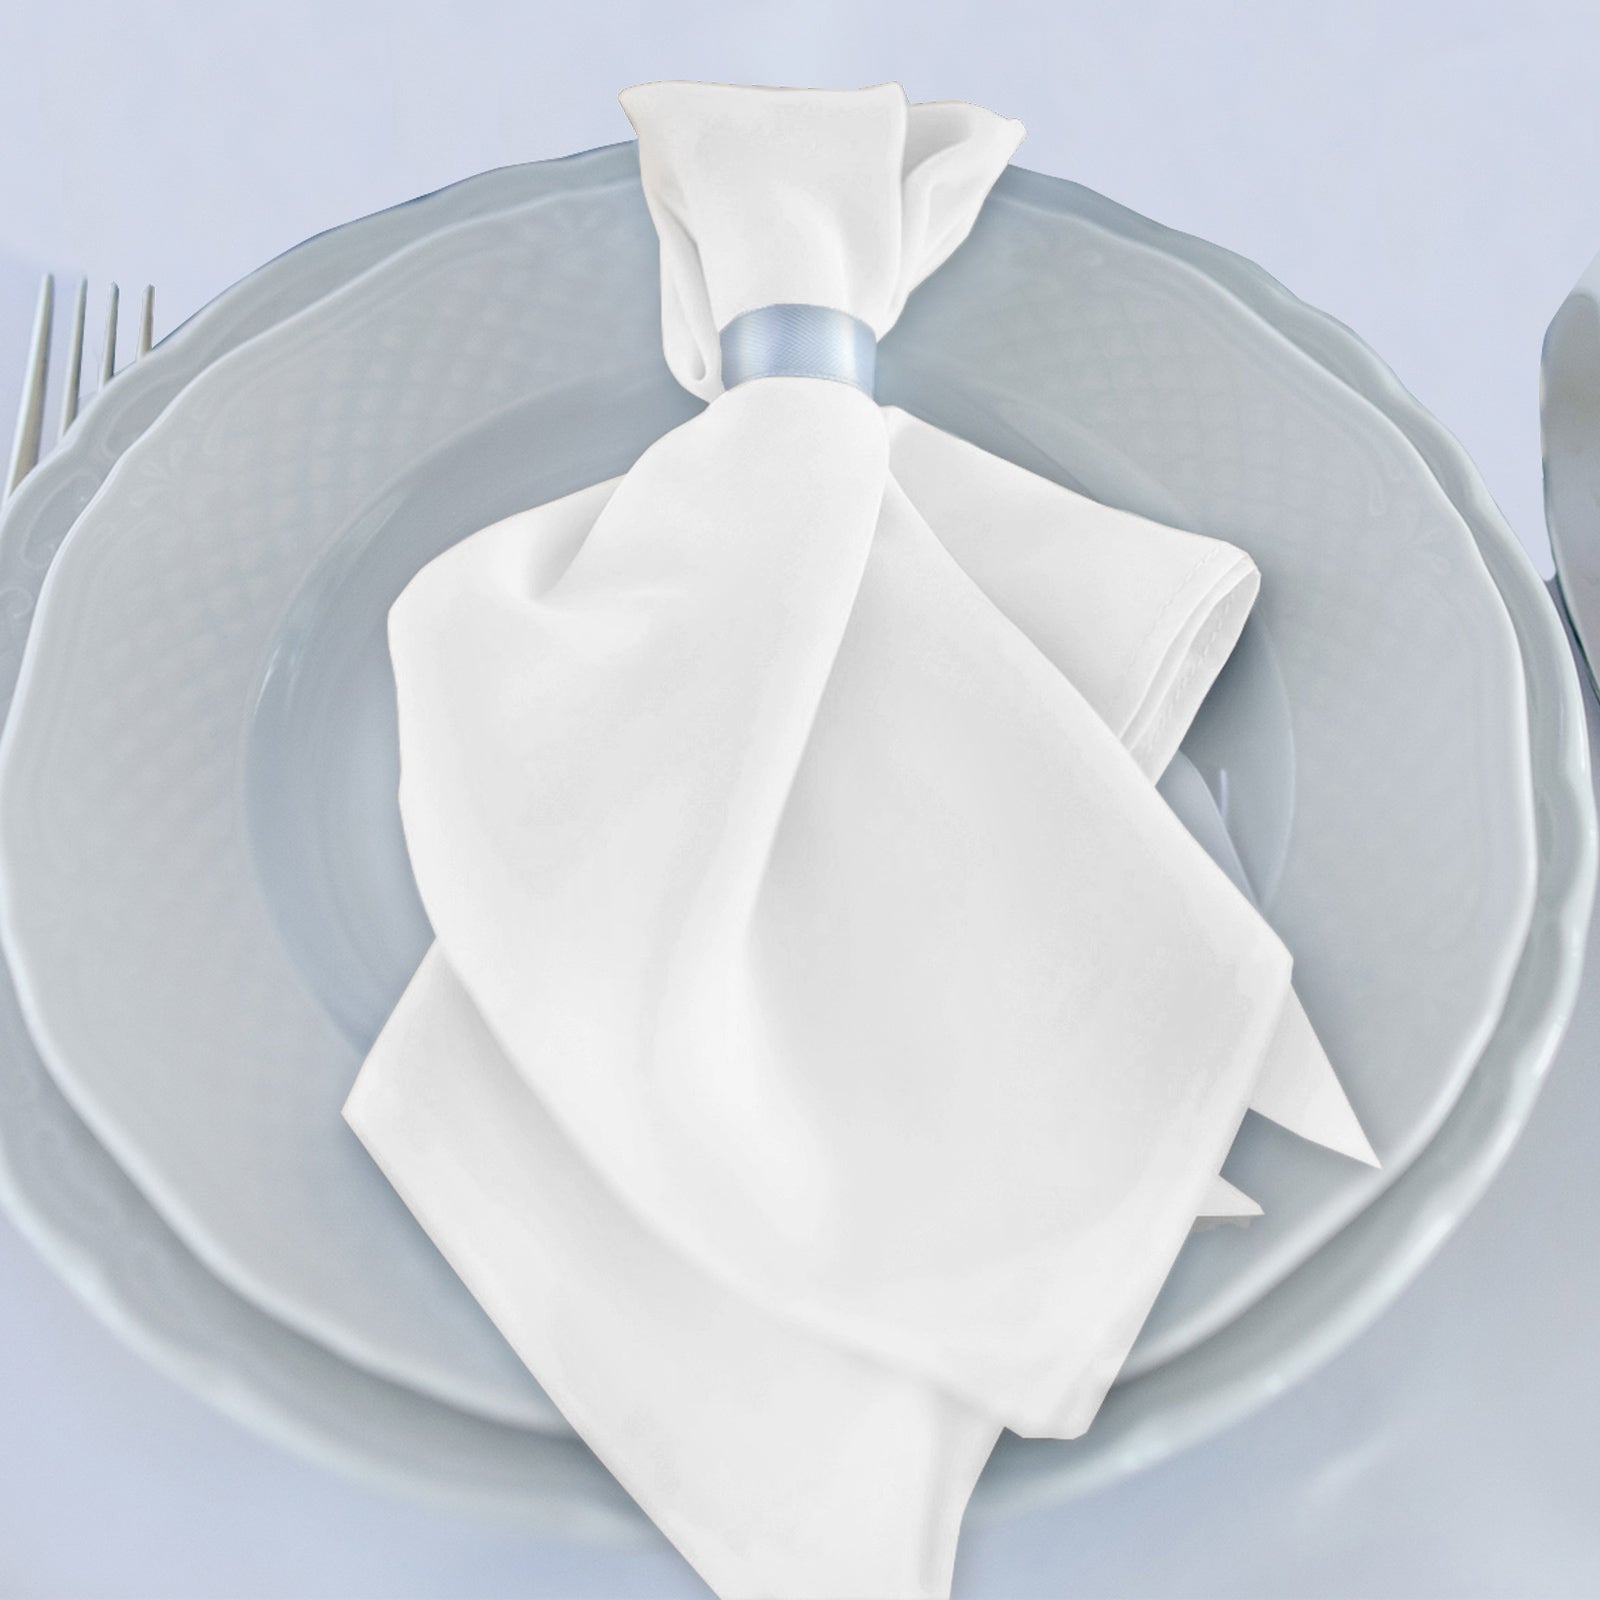 5 Pack Silver Striped Satin Cloth Napkins, Wrinkle-Free Reusable